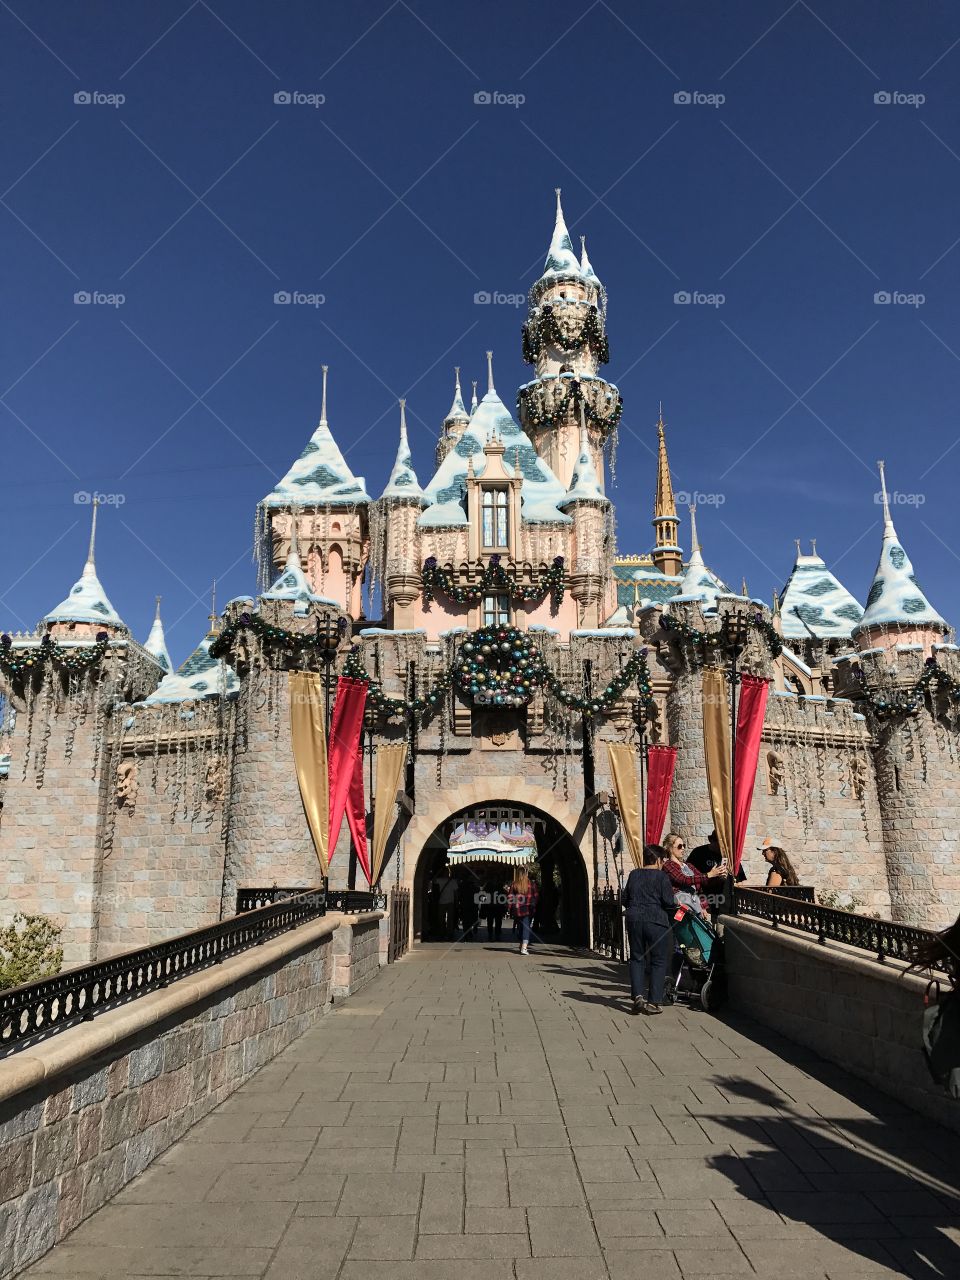 Disneyland Castle decorated in the daytime 